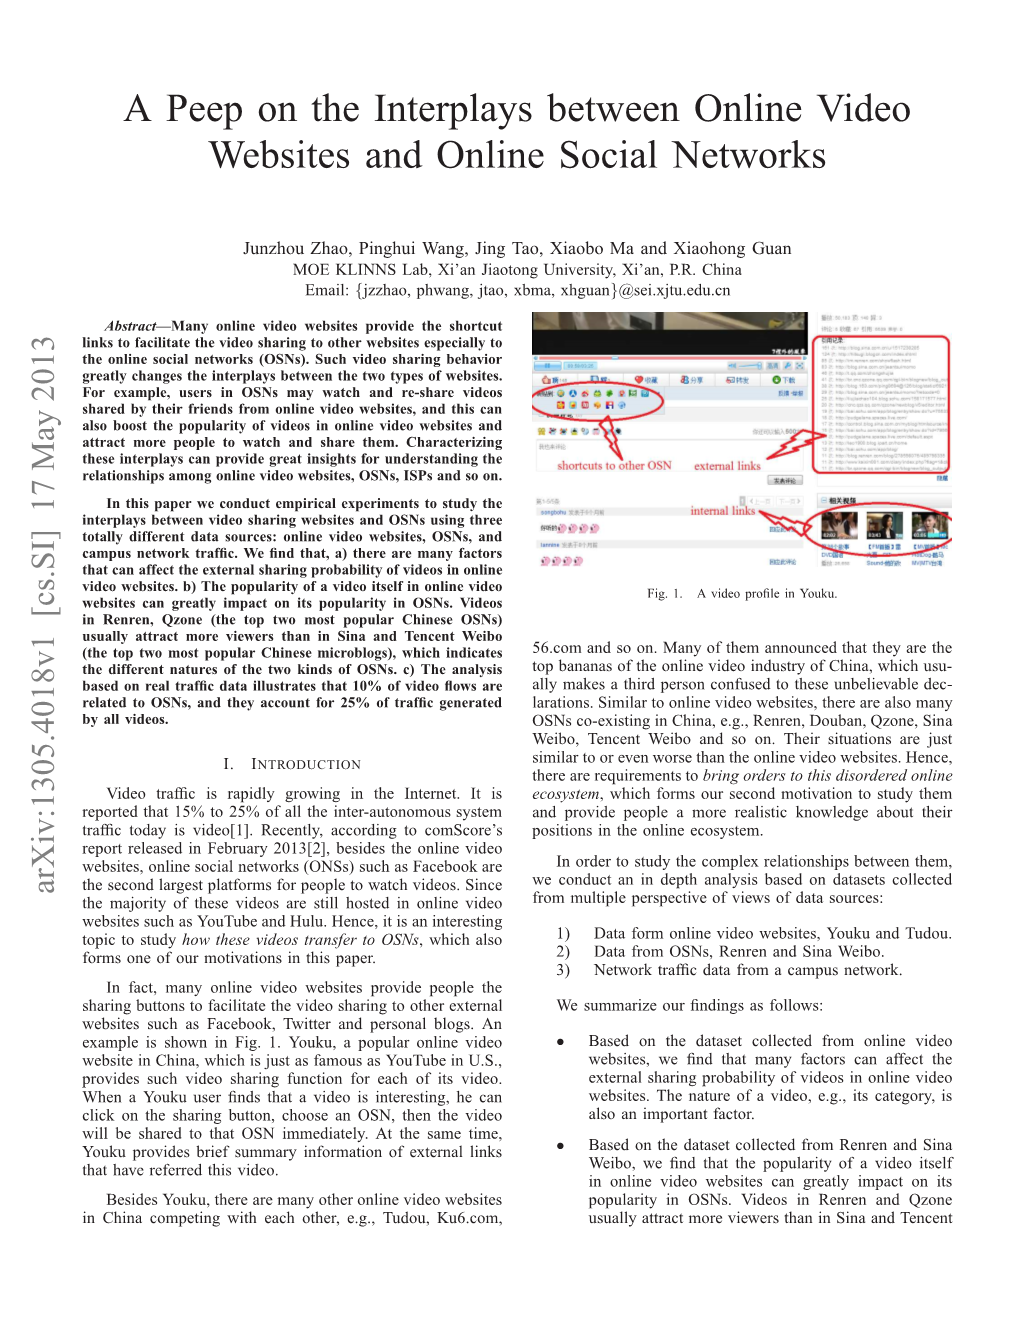 A Peep on the Interplays Between Online Video Websites and Online